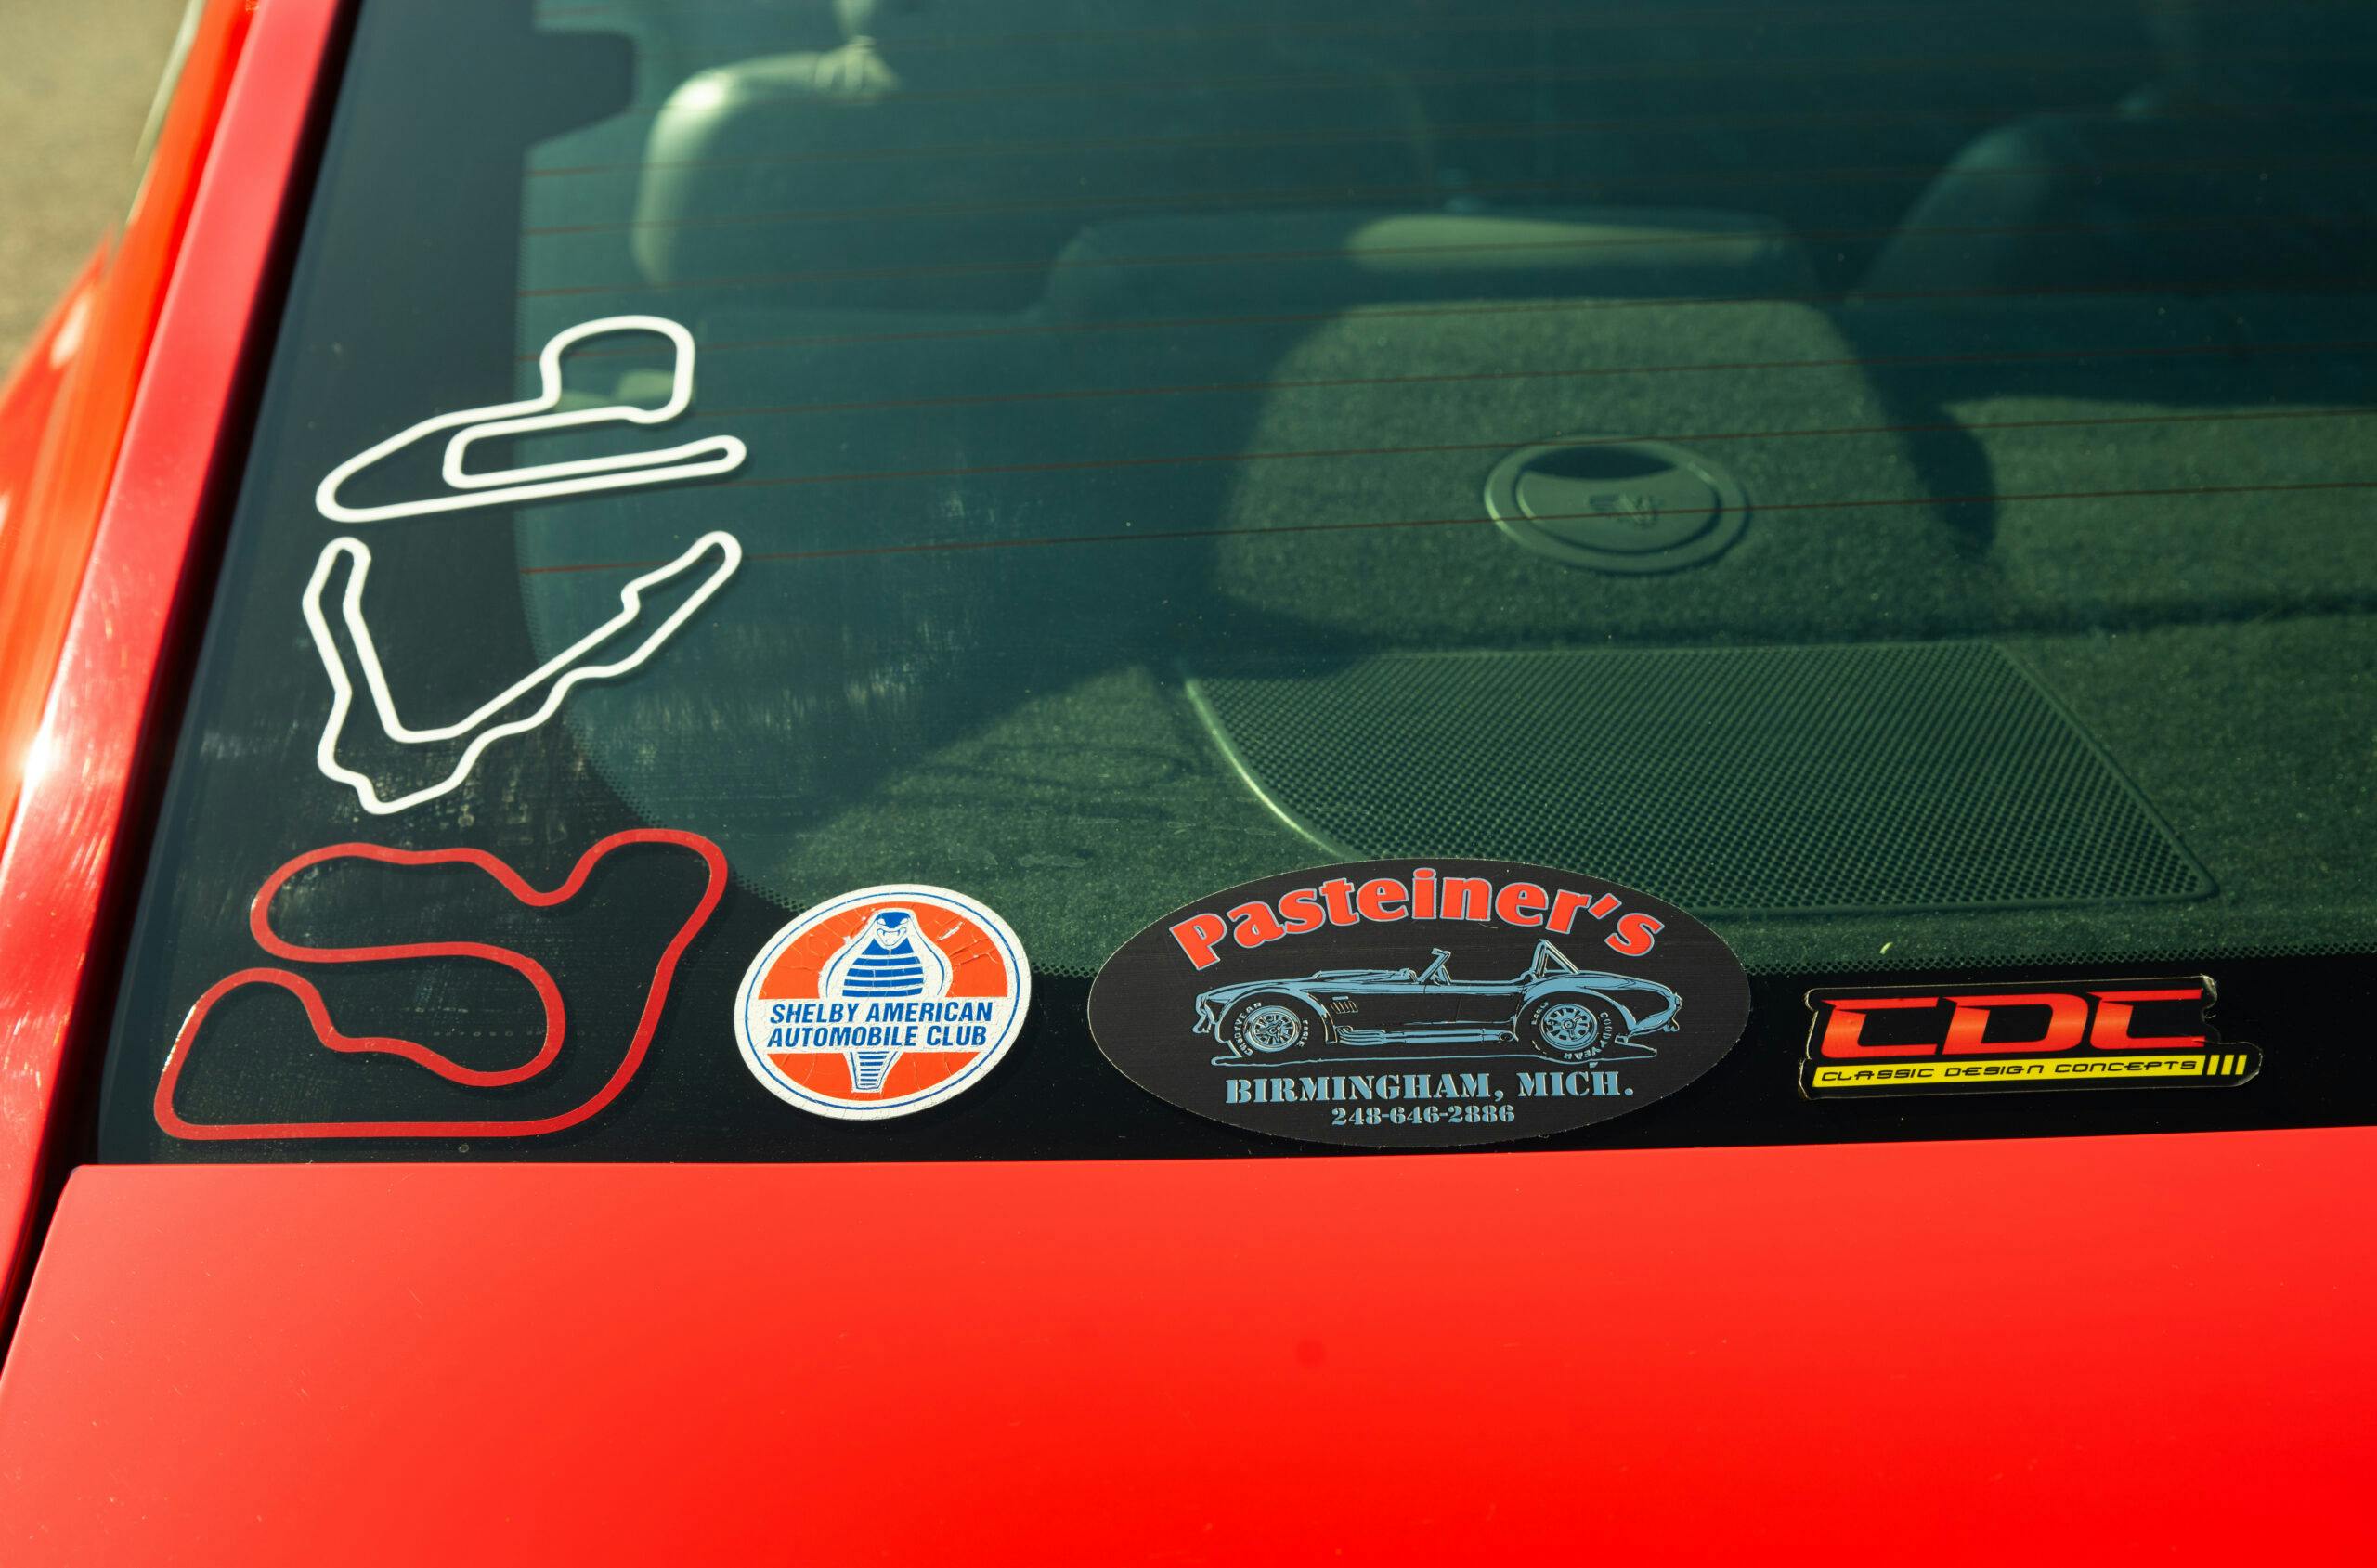 2006 Mustang GT custom livery track stickers